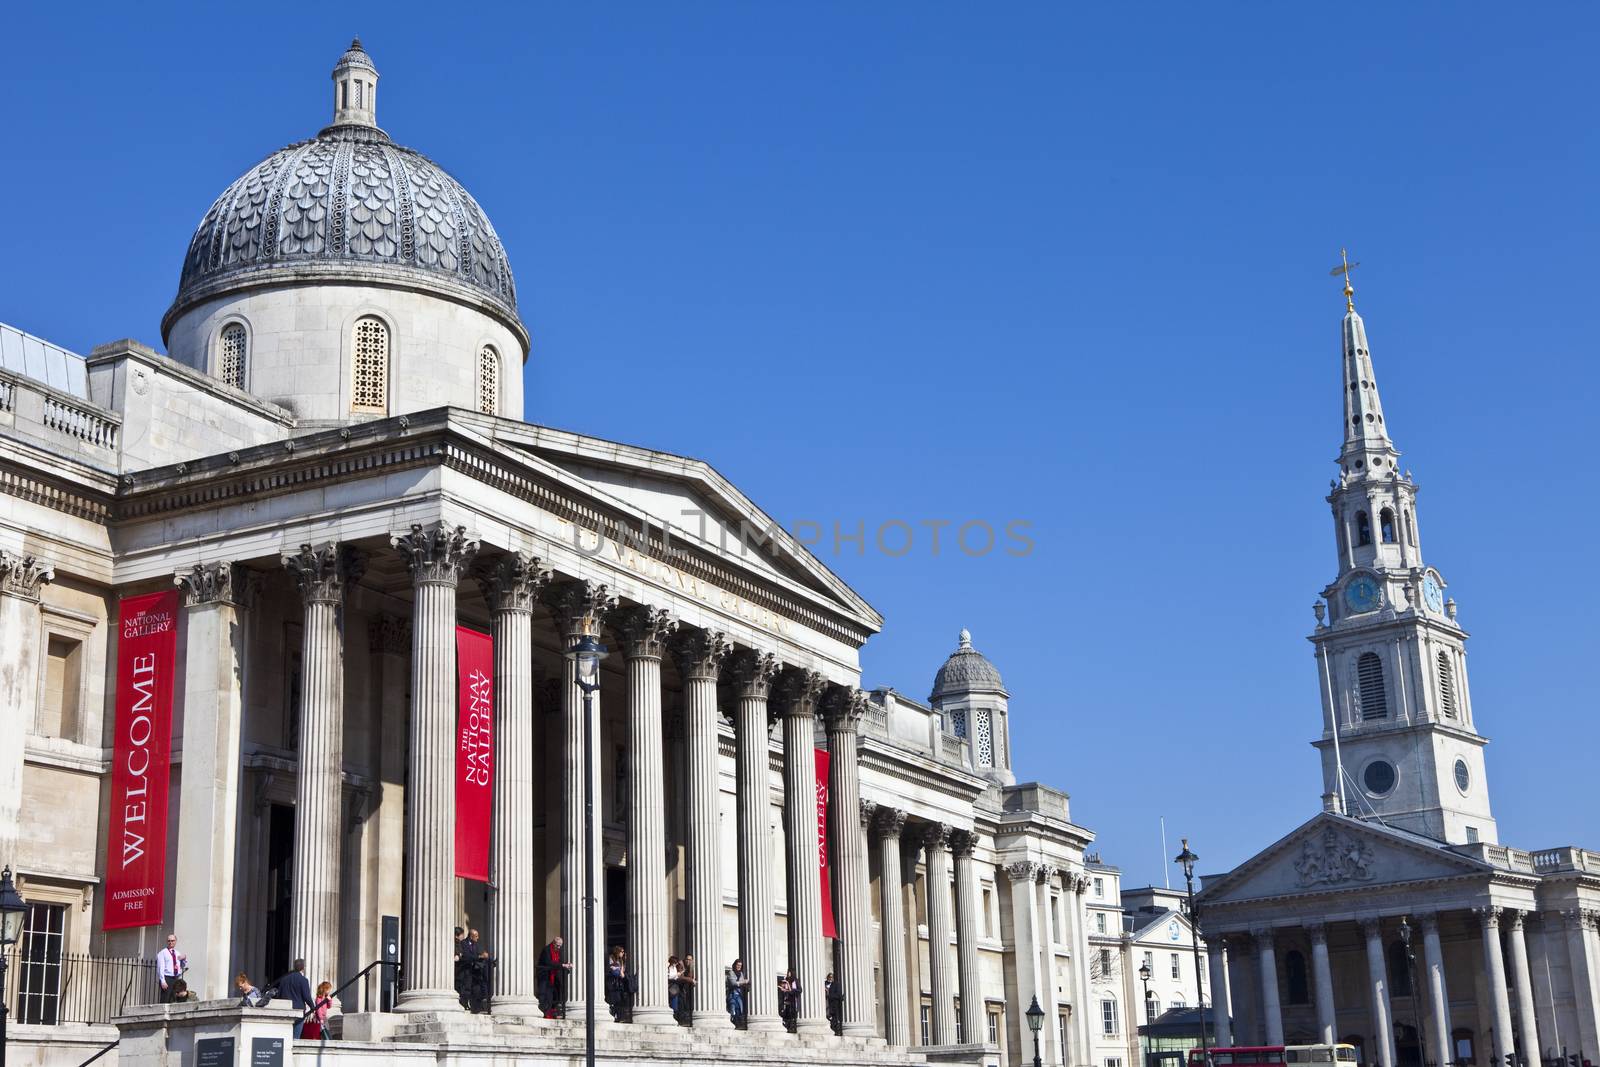 The National Gallery and St Martin in the Fields church in London.